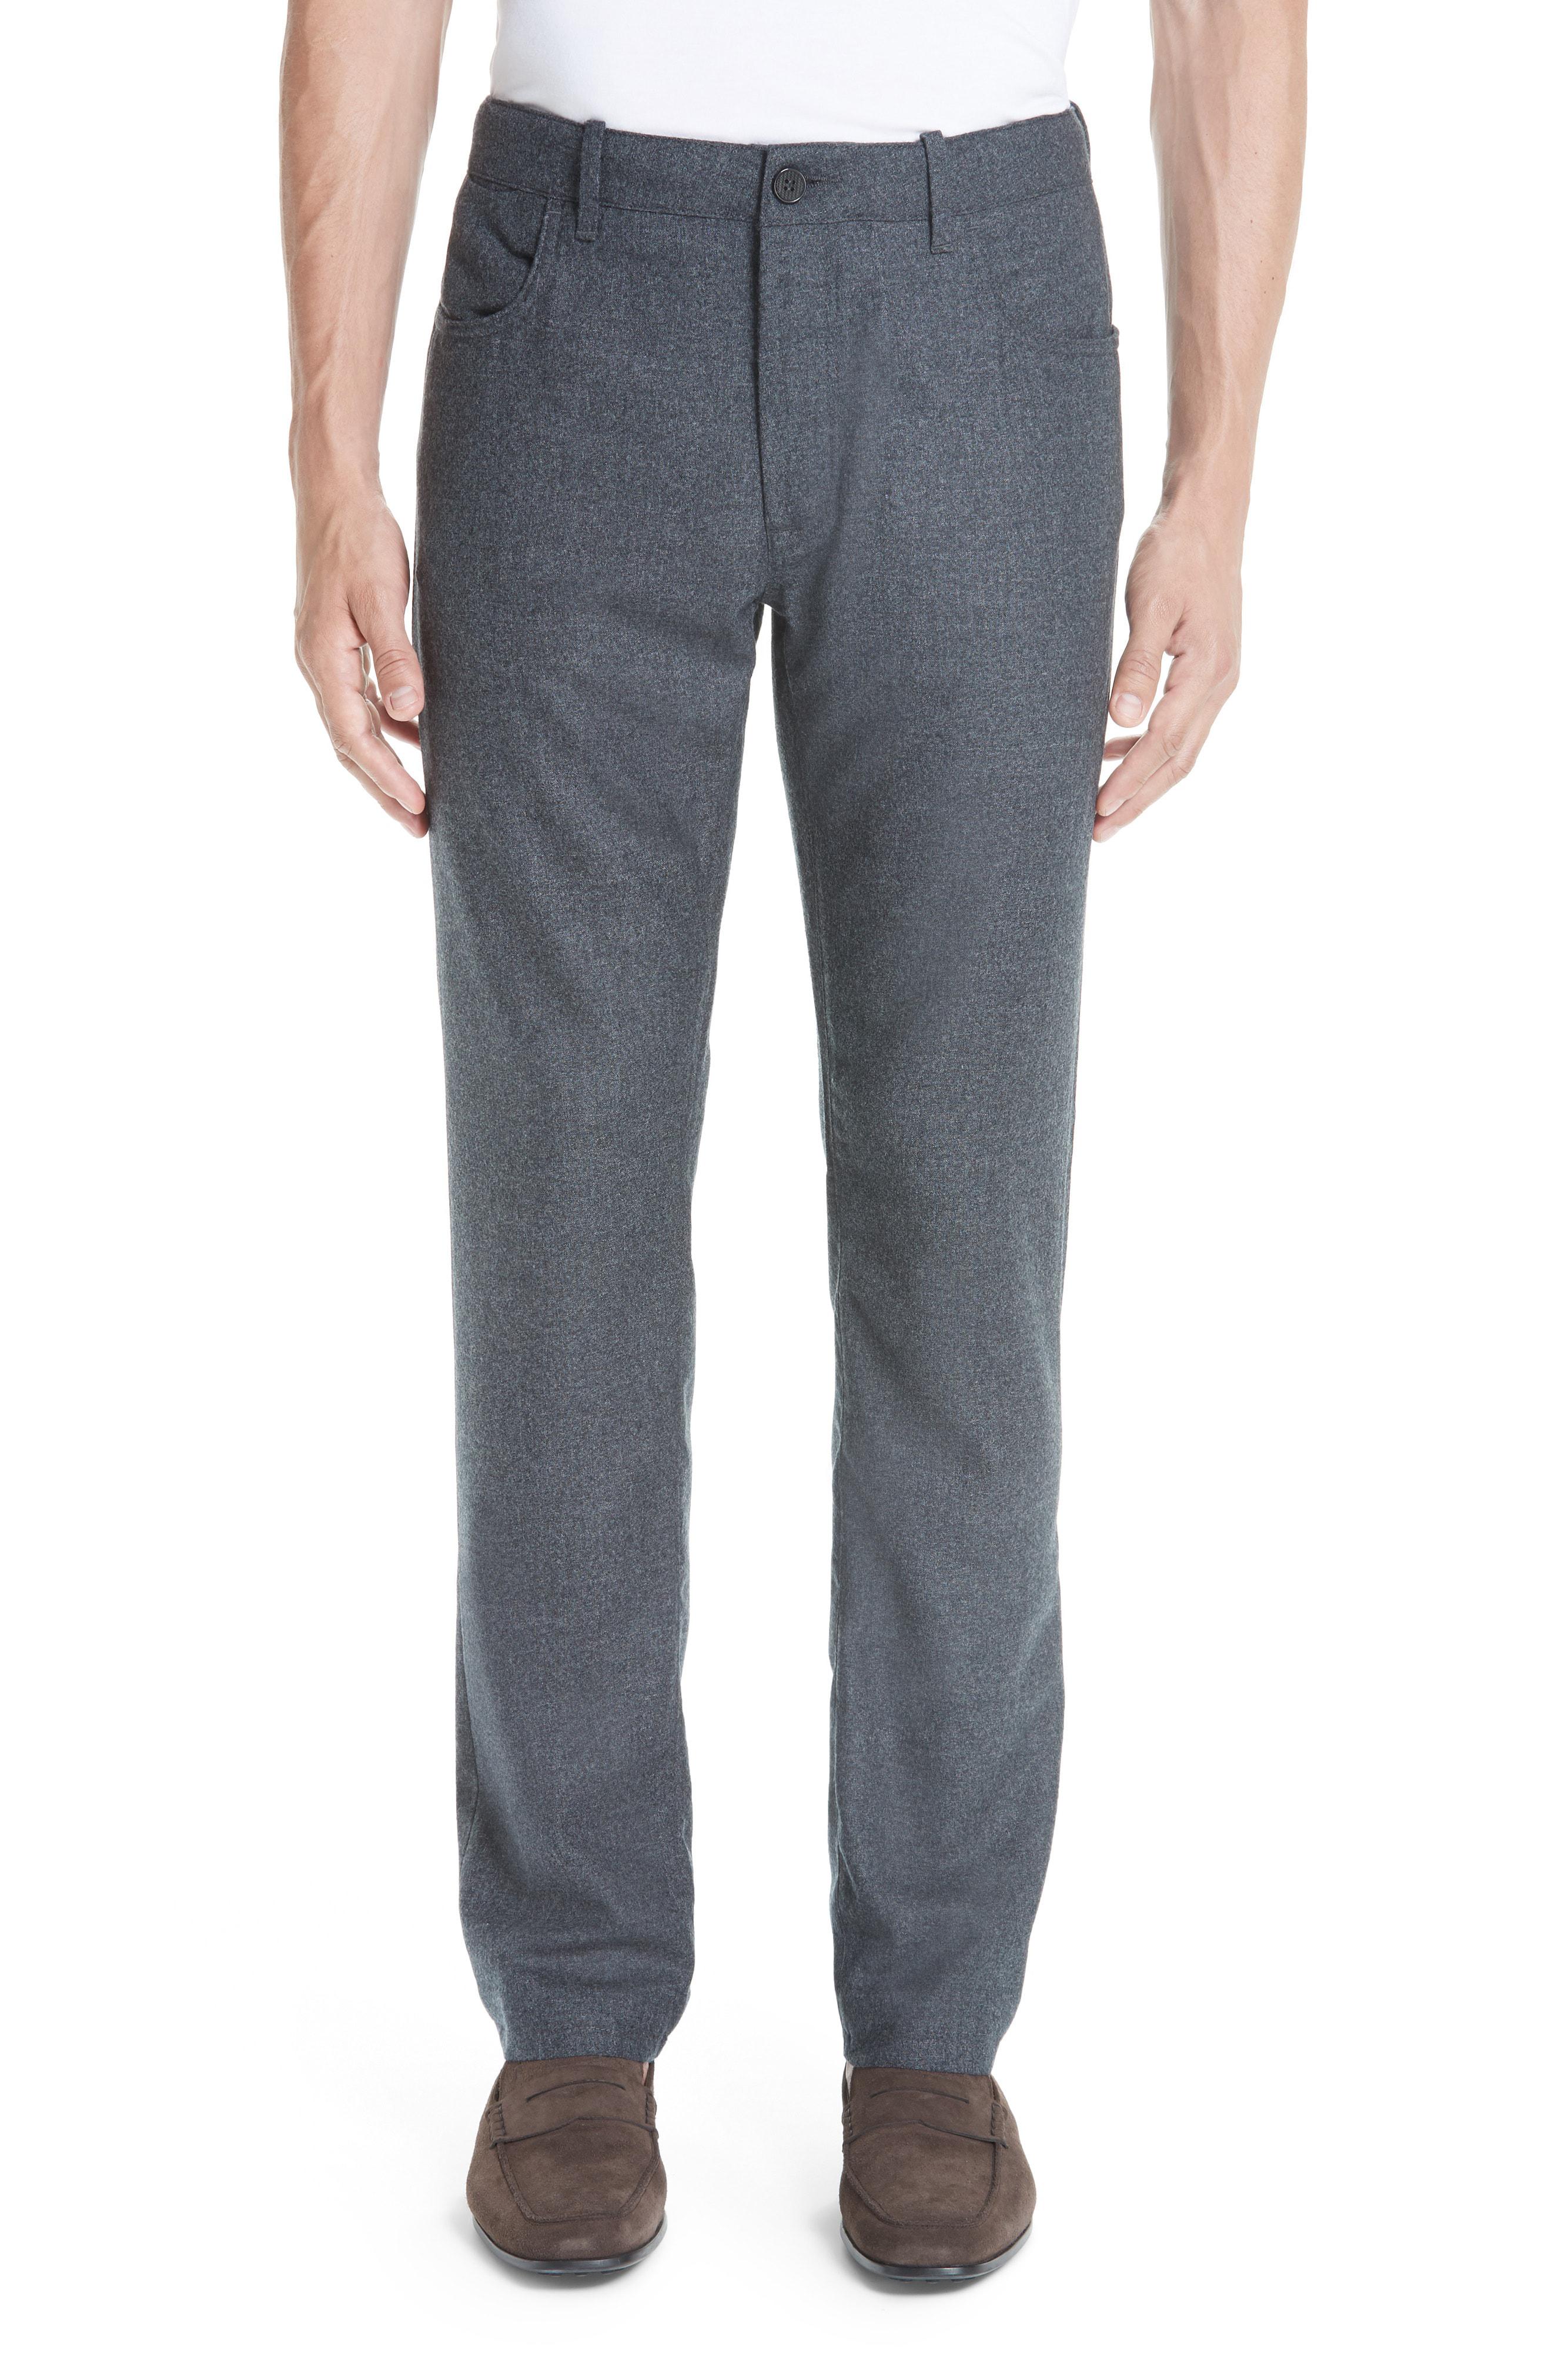 Canali Flat Front Flannel Wool Five-pocket Trousers in Gray for Men - Lyst